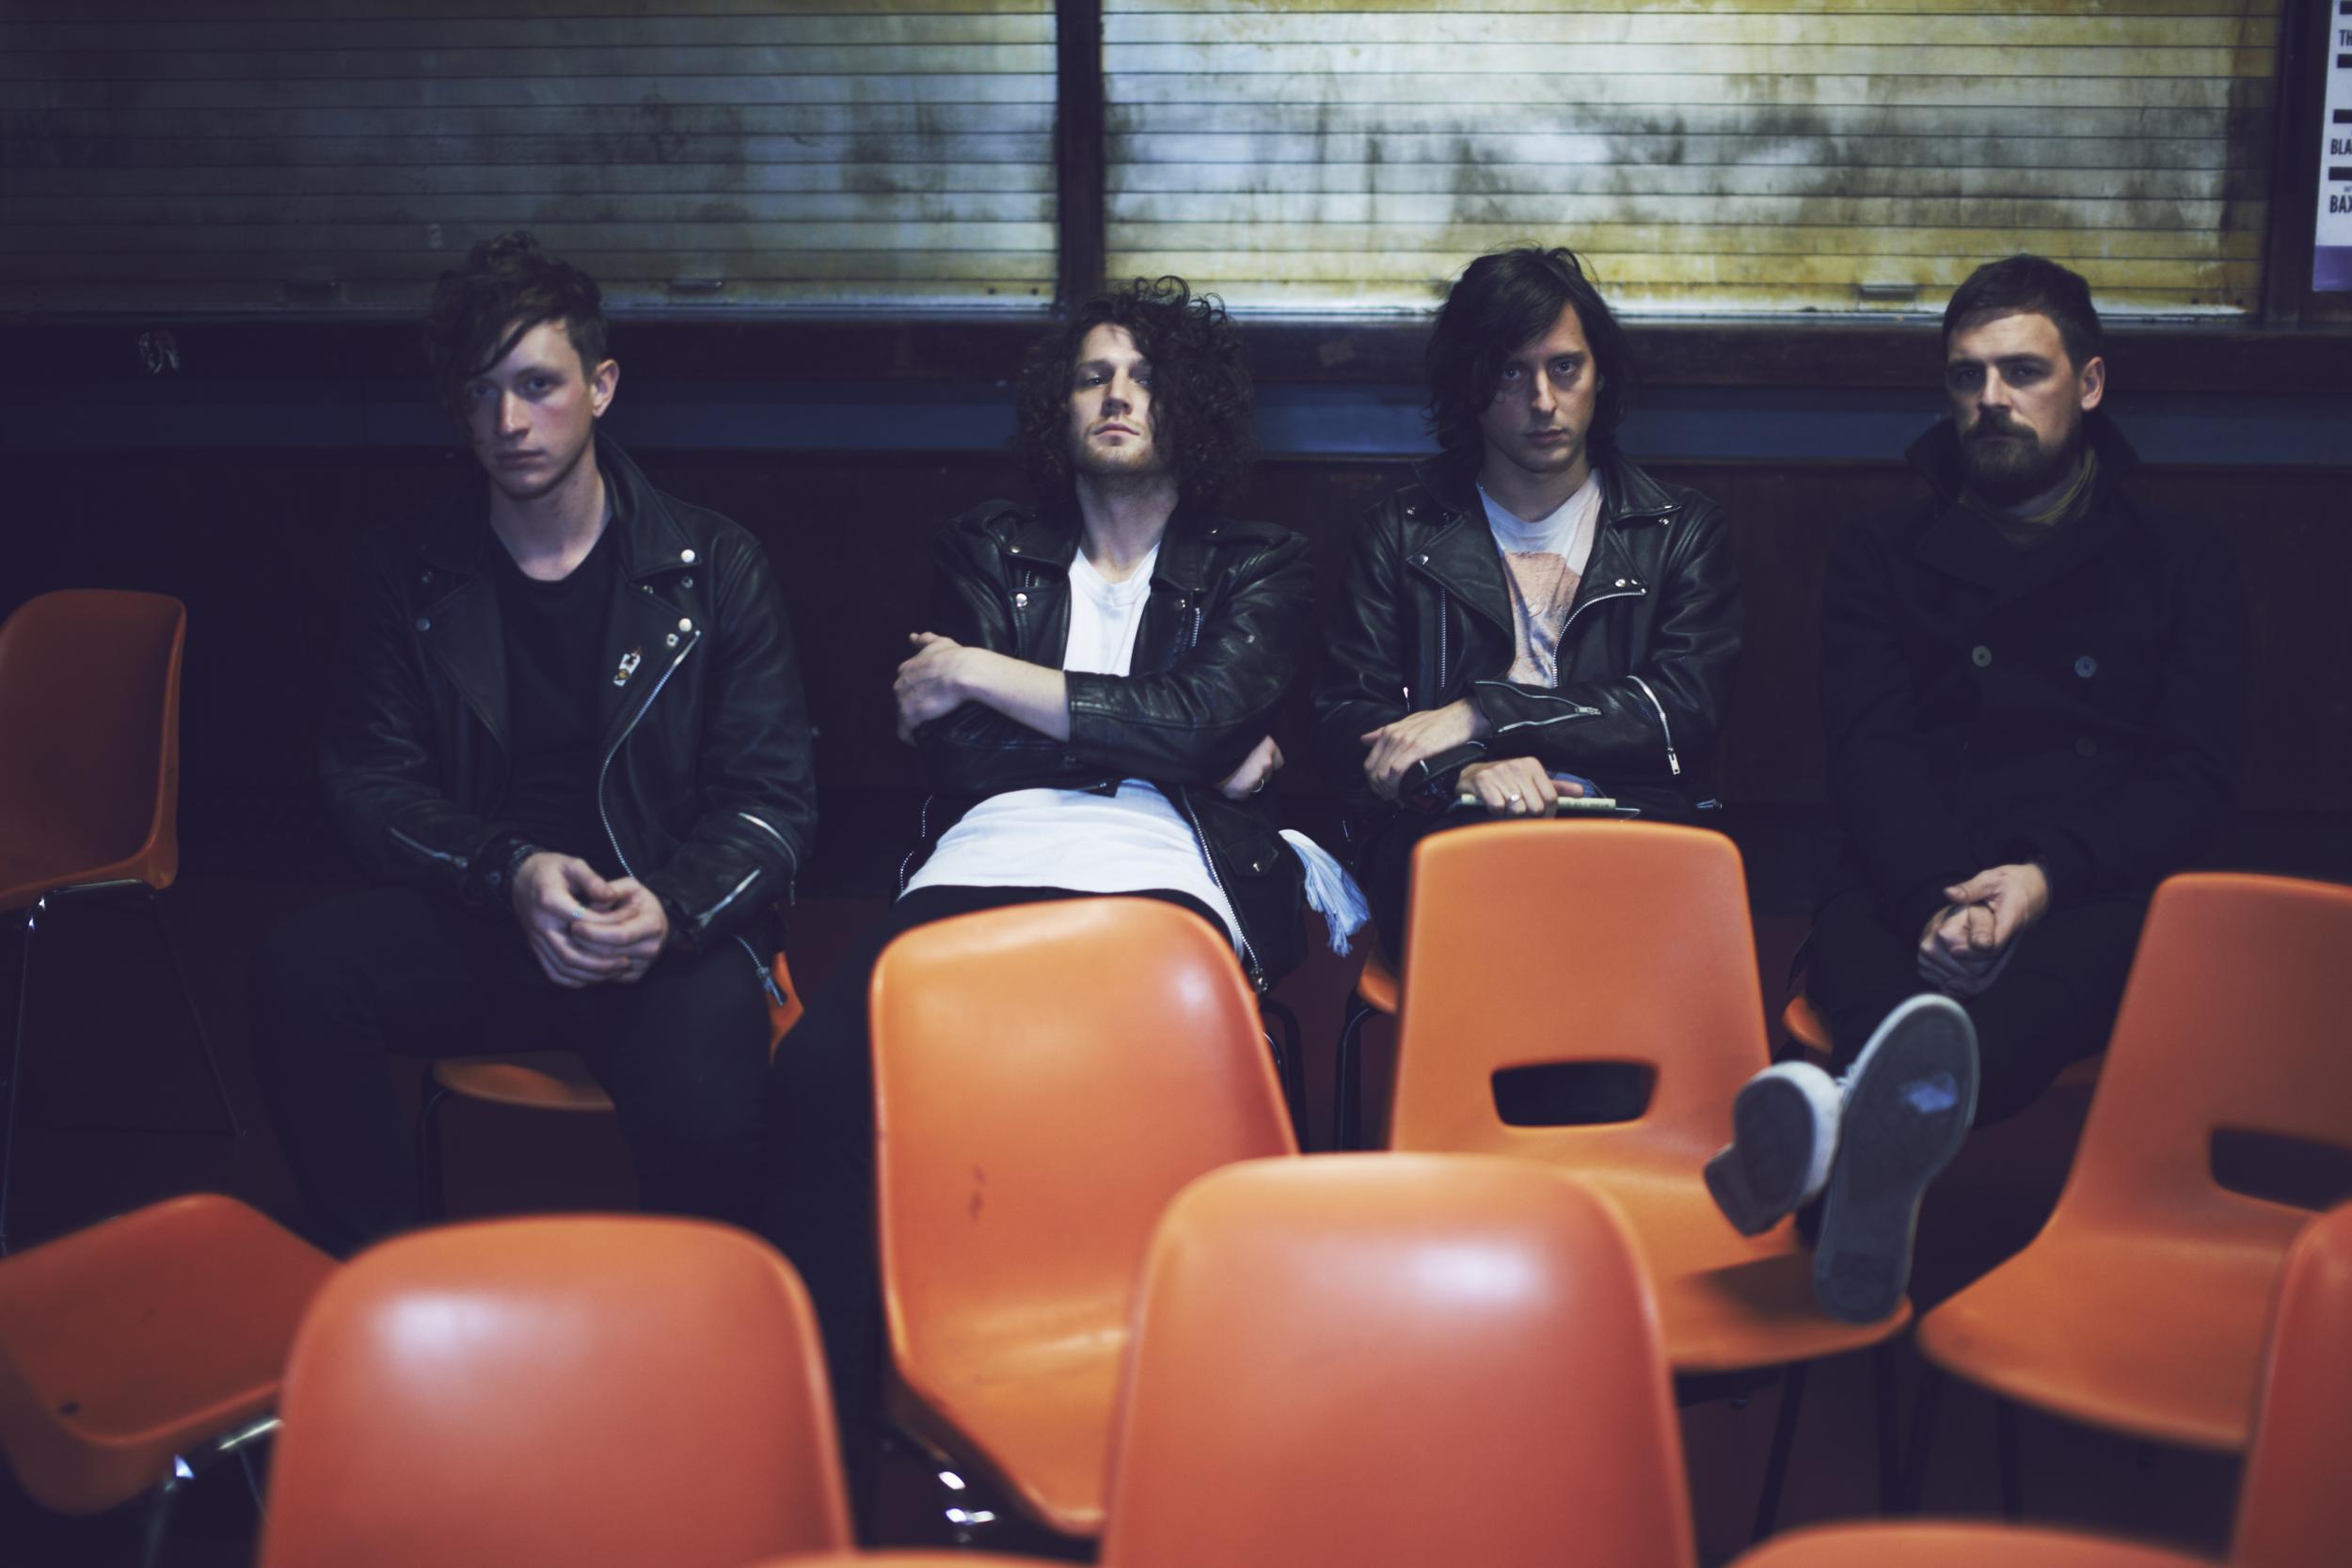 Carl Barat & the Jackals are appearing at 1-2-3-4 Festival